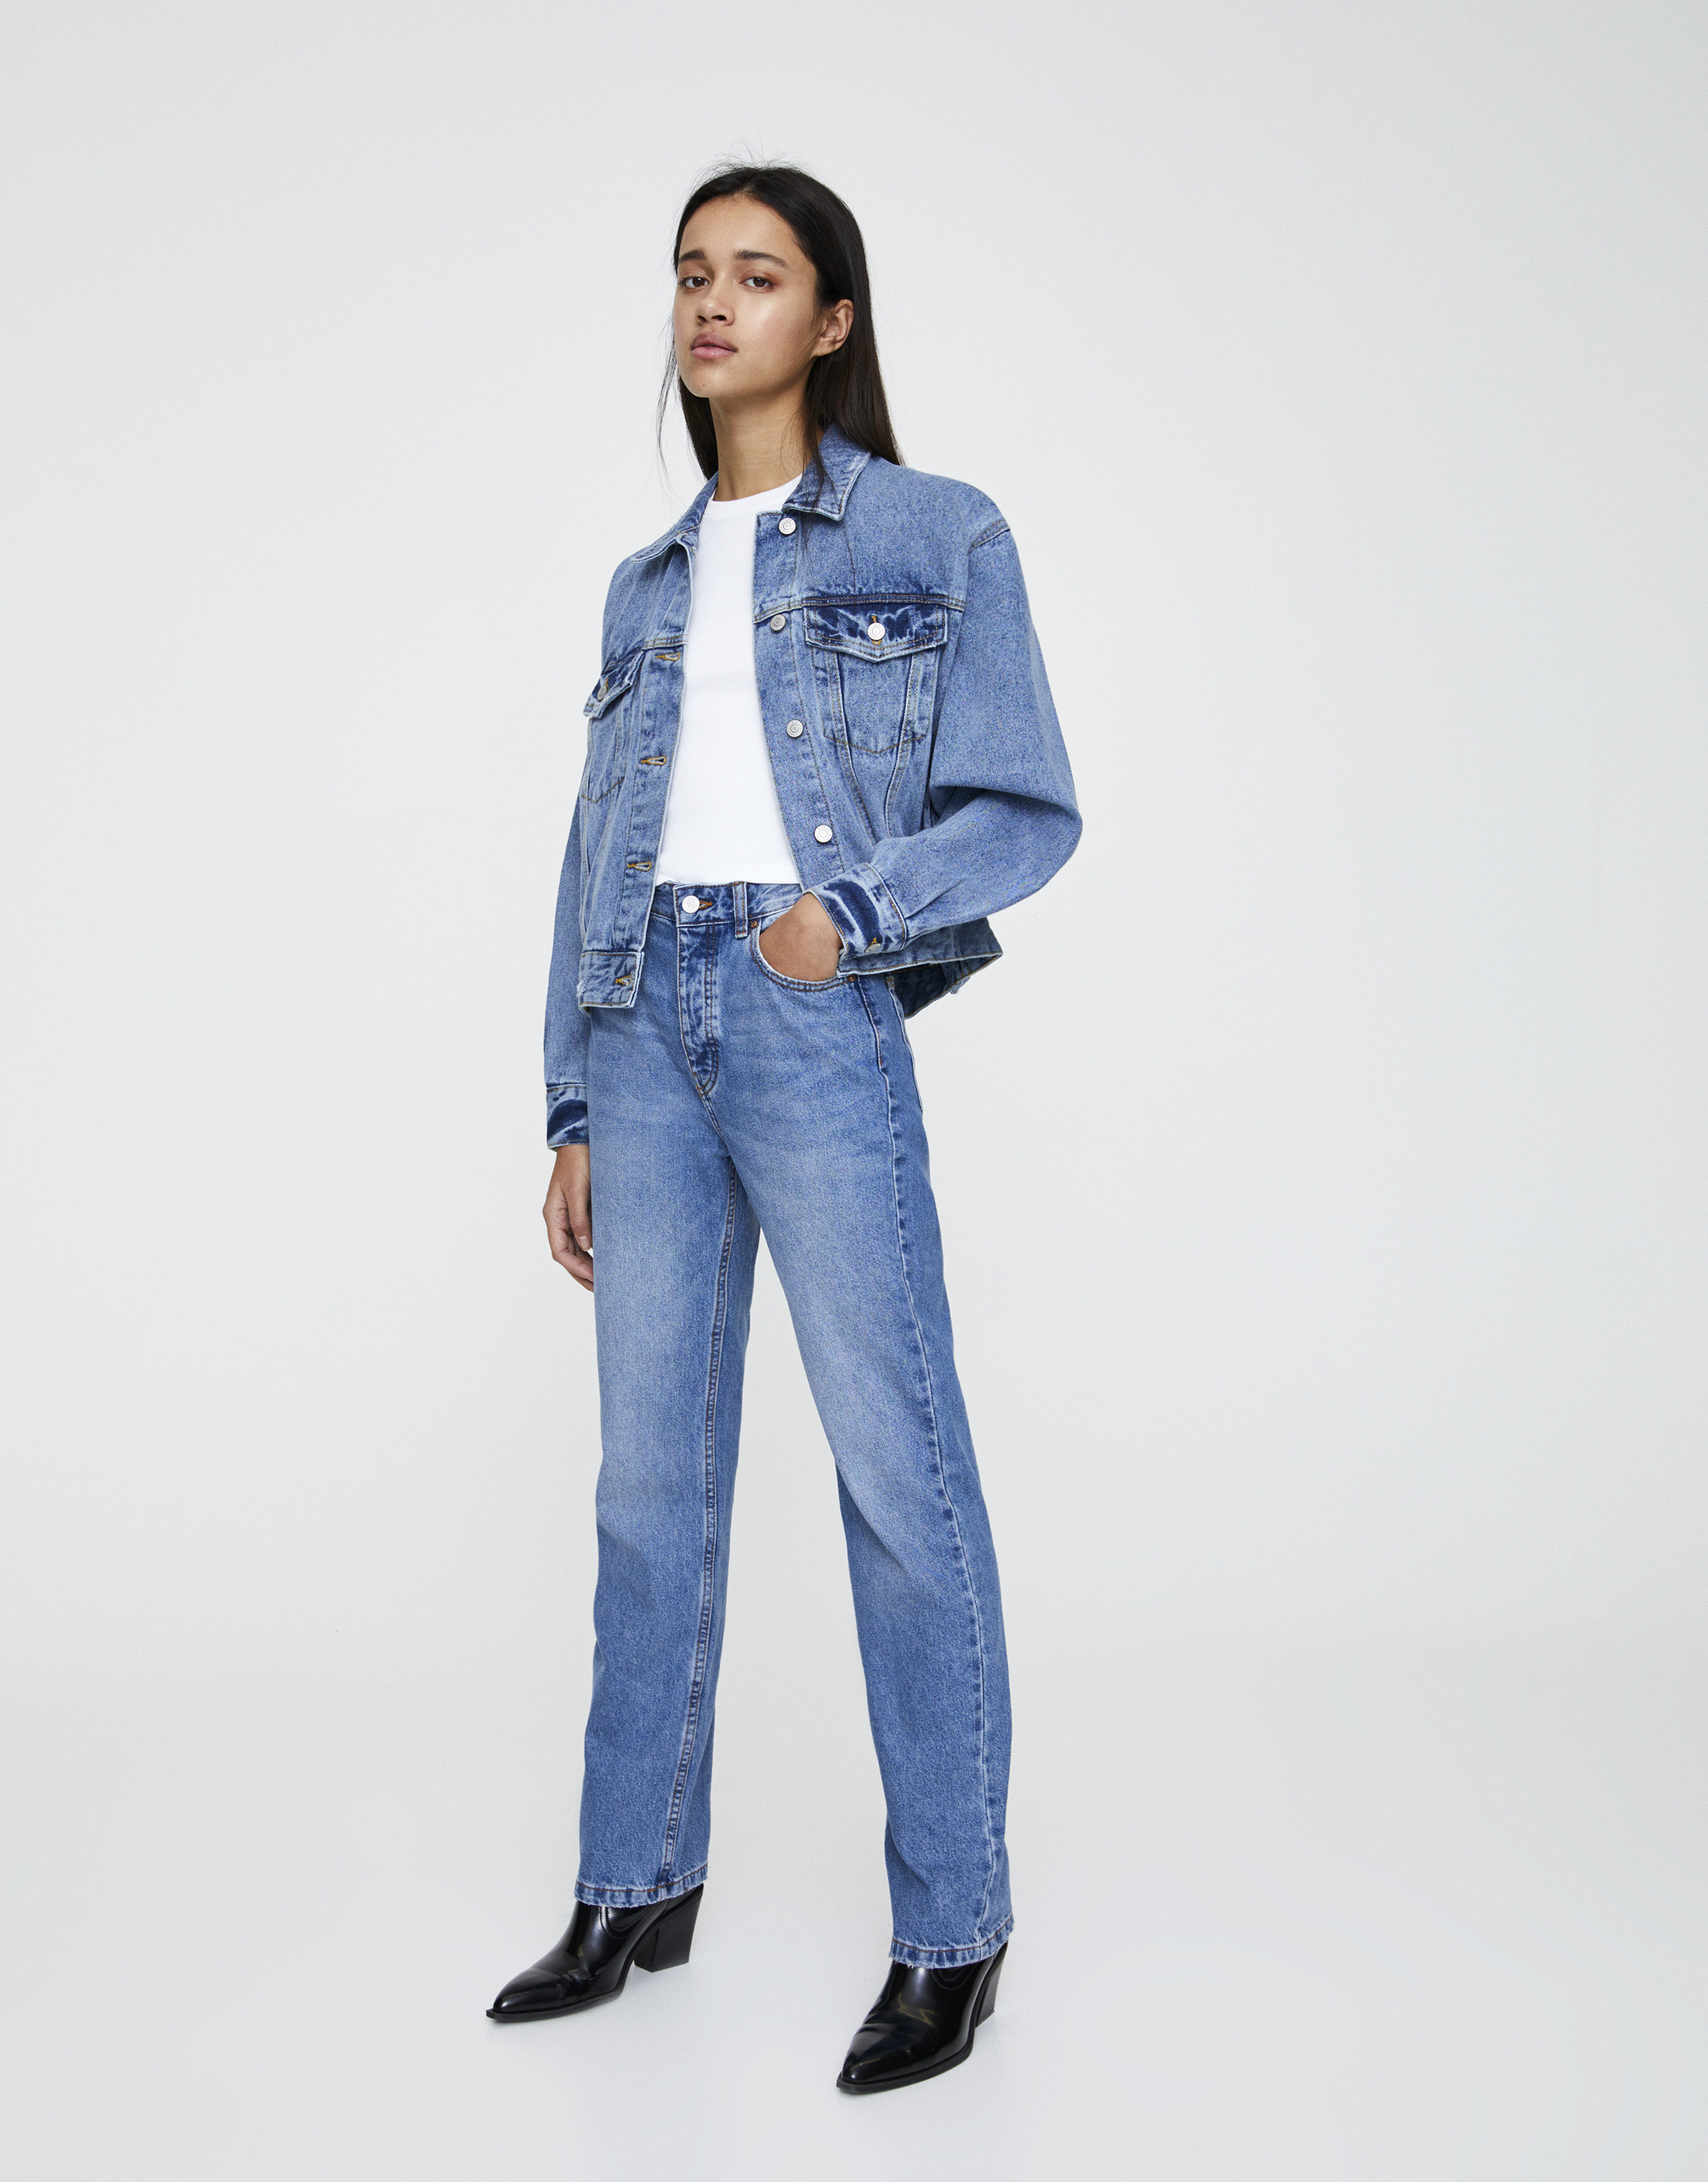 pull and bear regular jeans